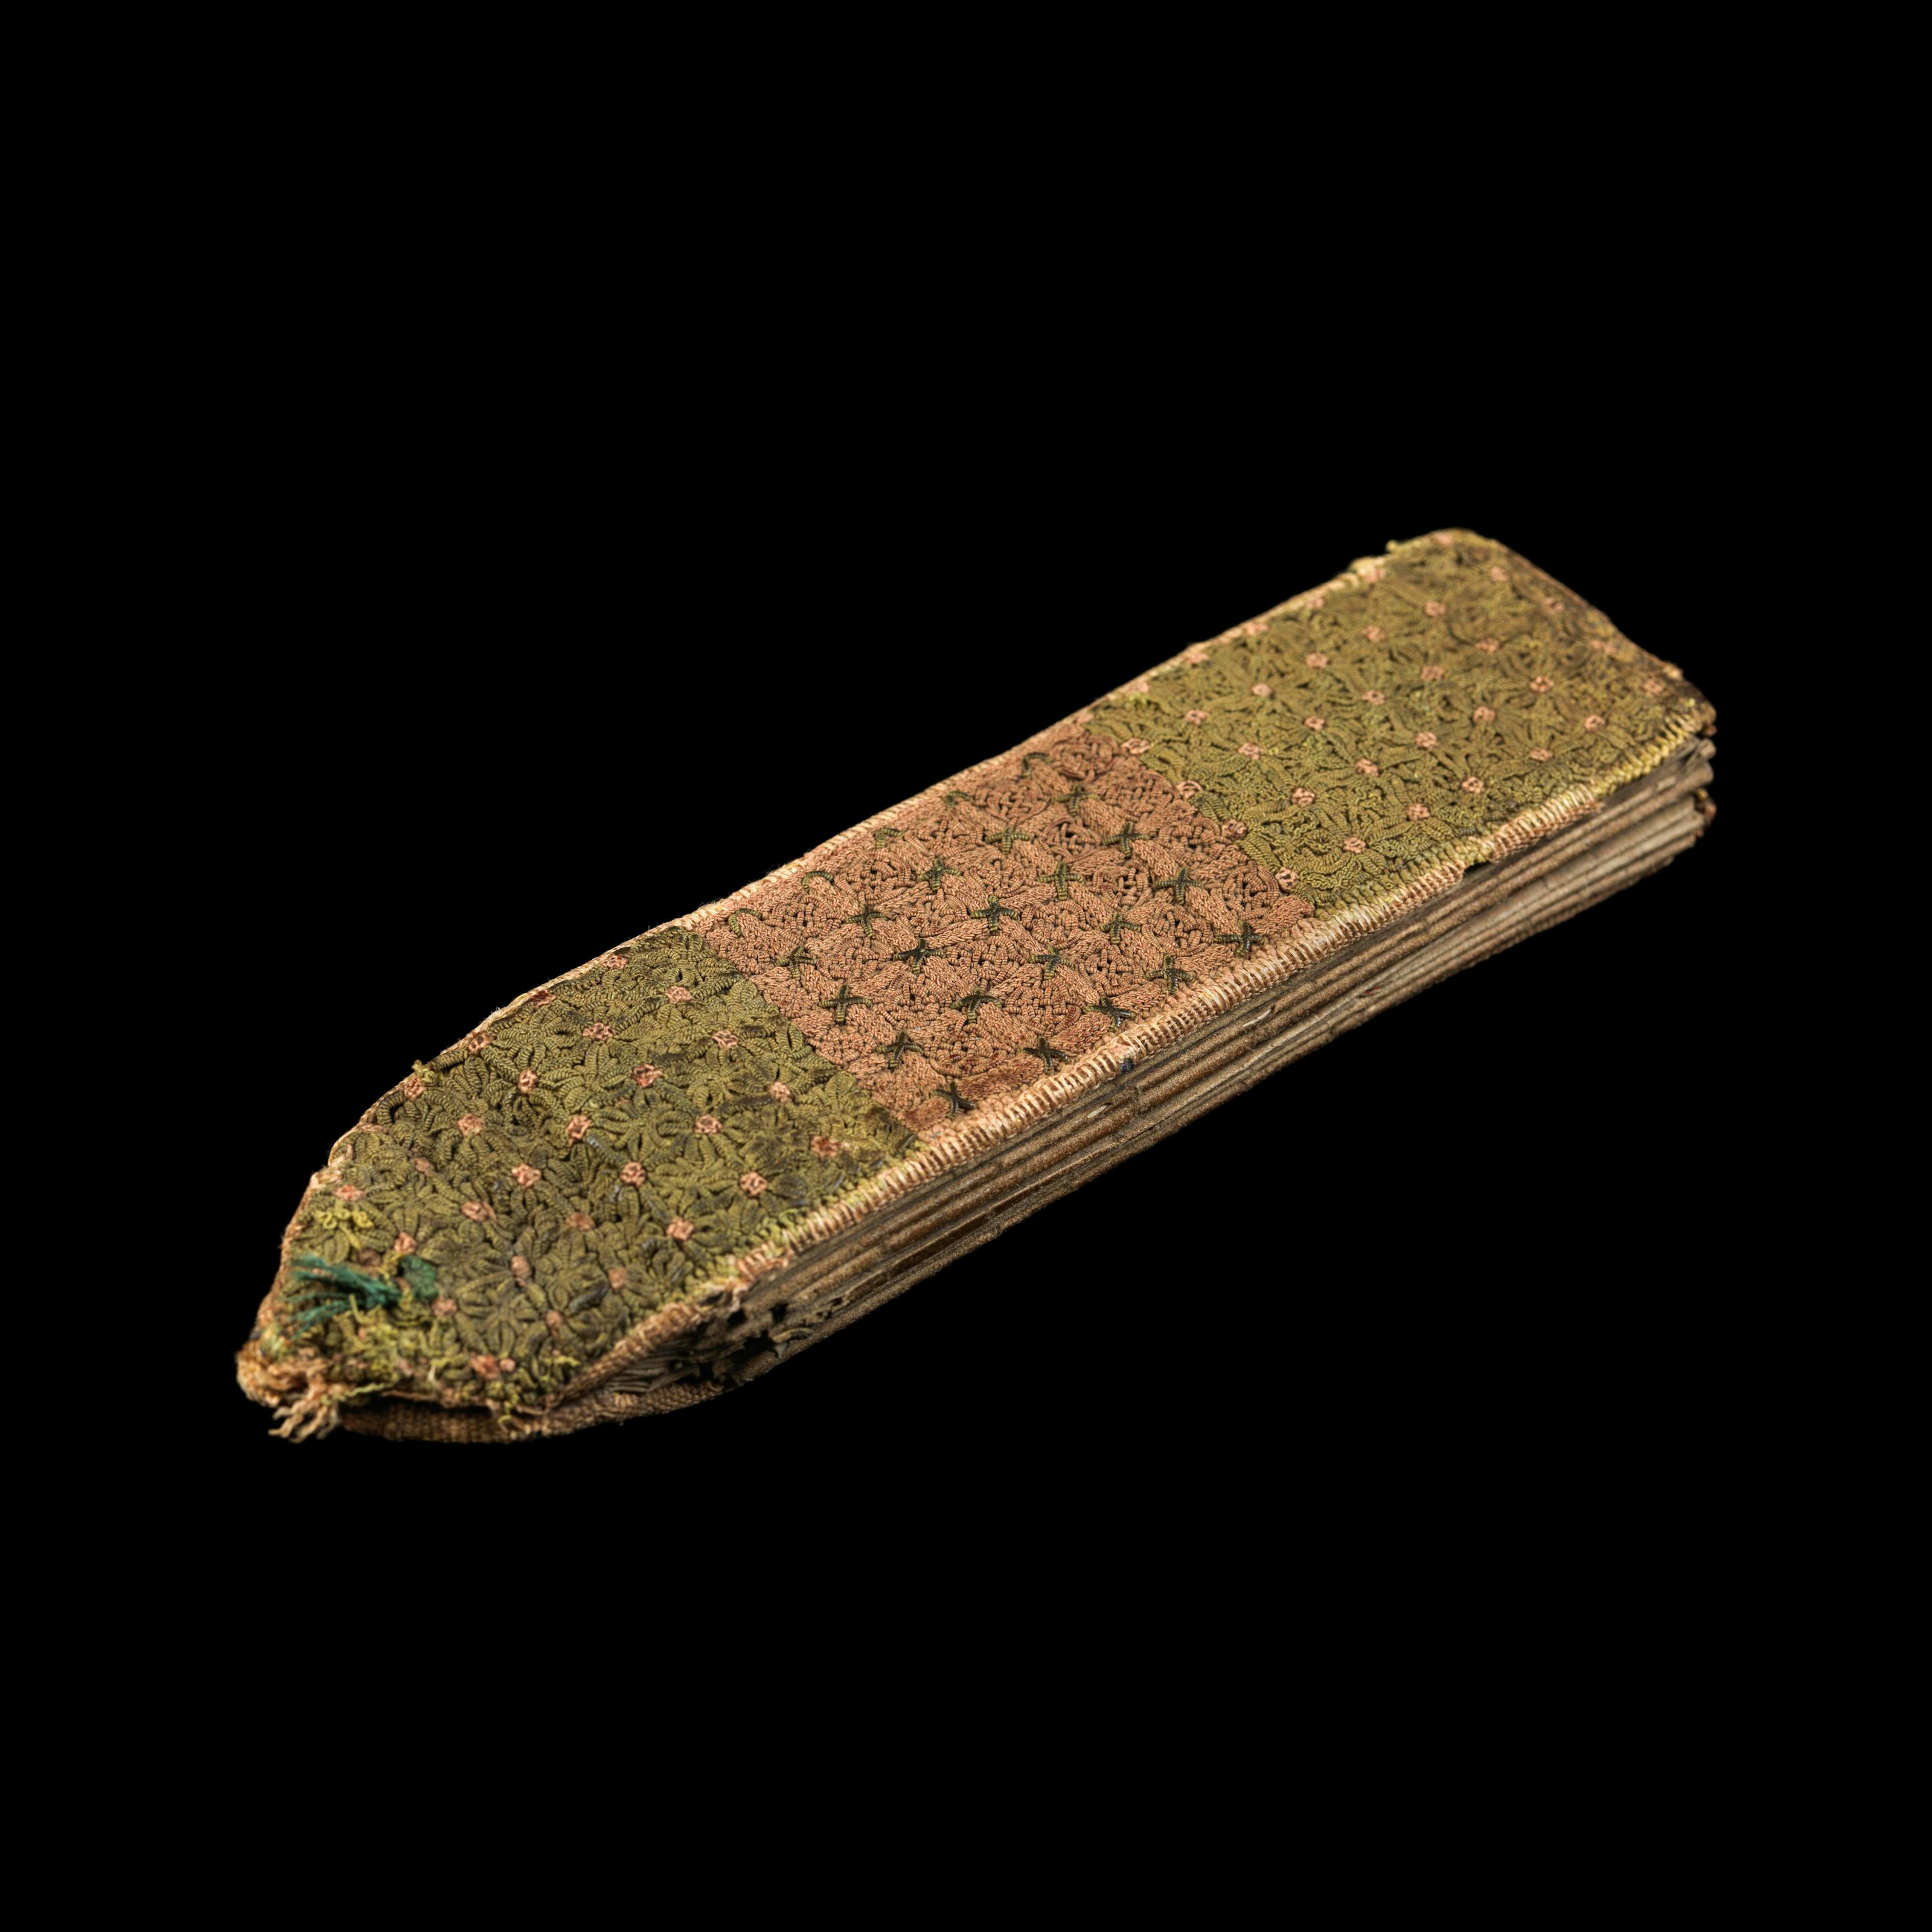 Photograph of a fragile folding almanac from the 15th century. The almanac is spotlit on a black background. It has an intricate woven green and pink fabric cover and folded internal pages. It is rectangular in shape, but with a triangular taper on the left short end.